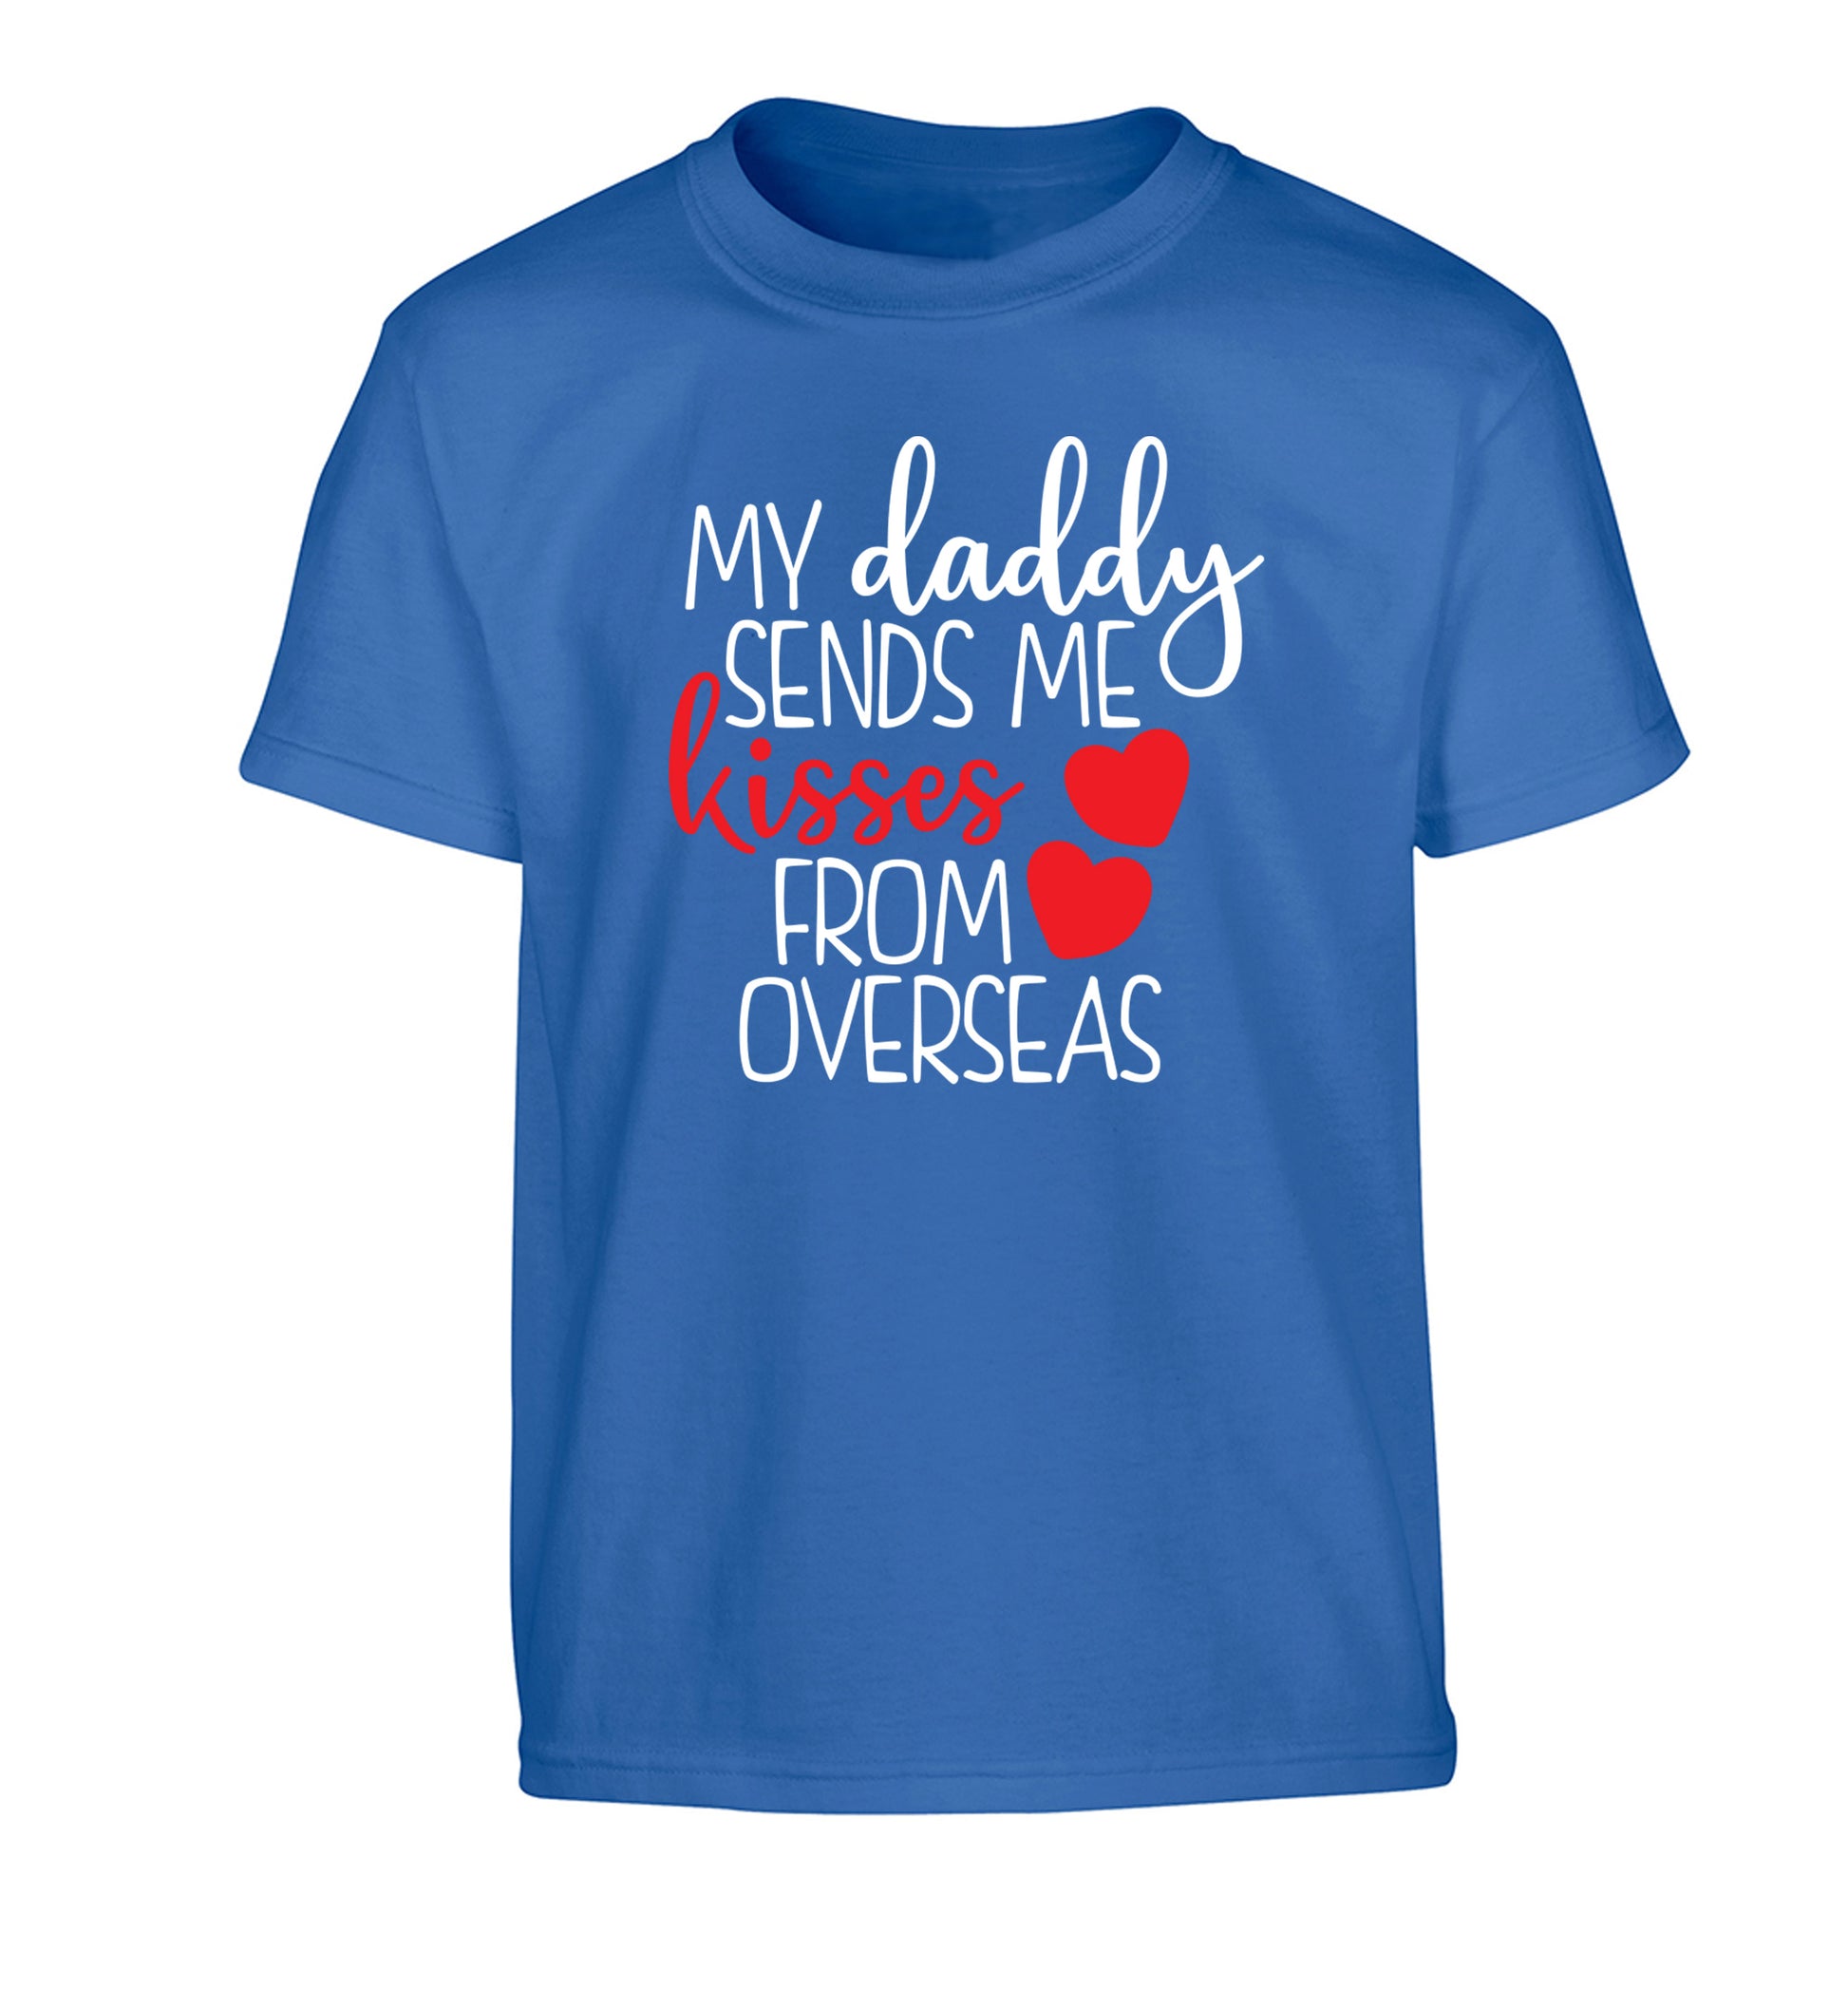 My daddy sends me kisses from overseas Children's blue Tshirt 12-13 Years